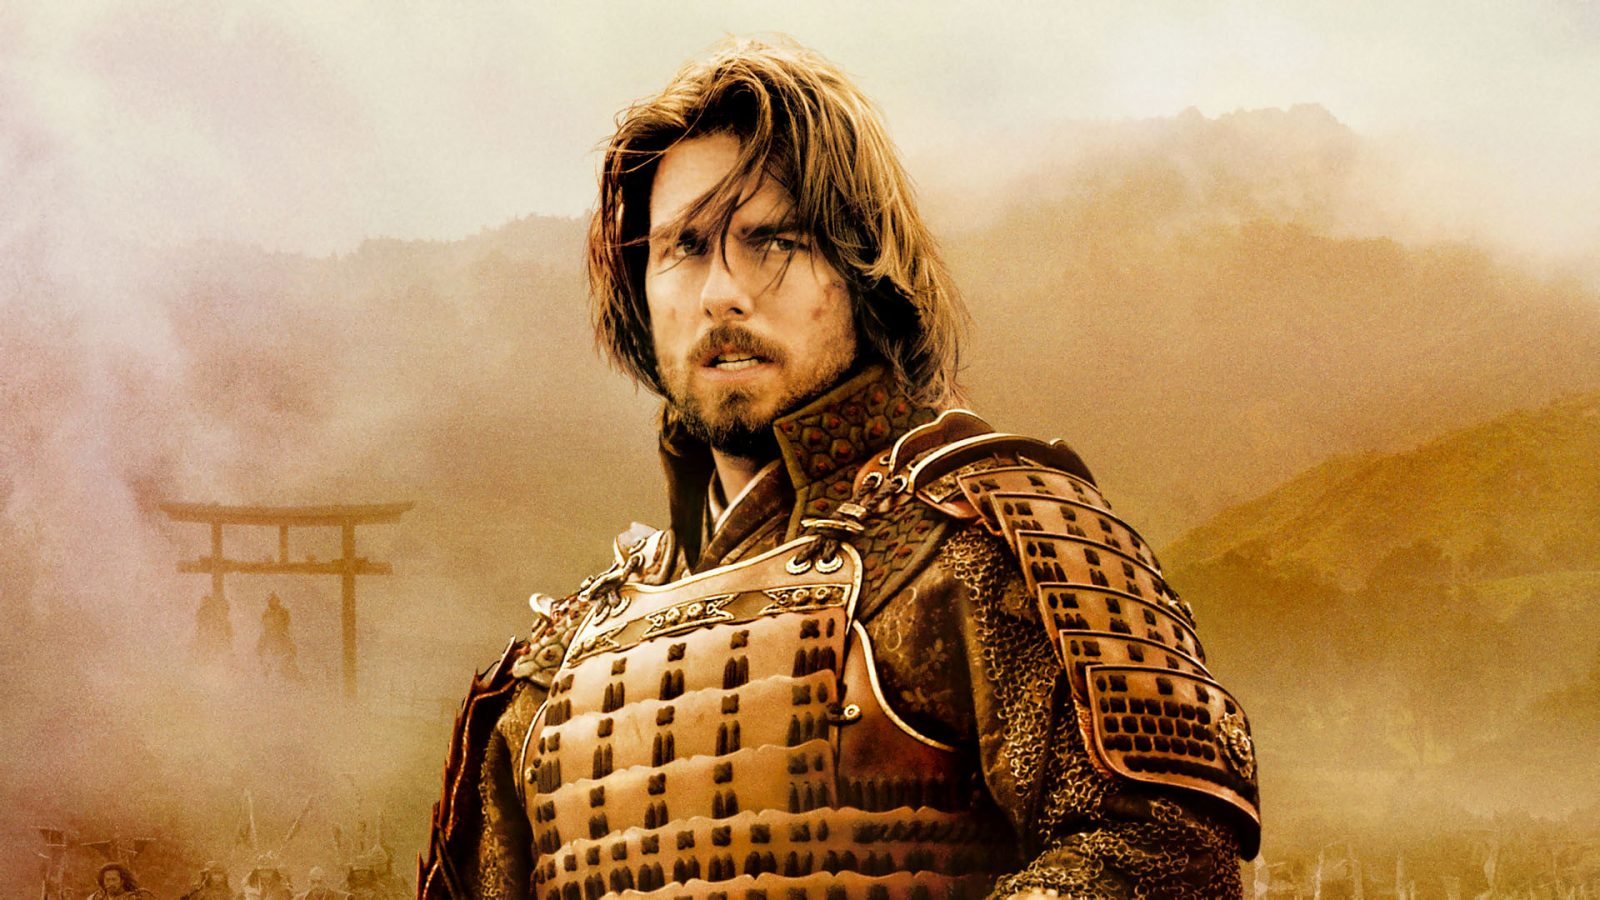 Can You Guess the Asian Country With Just Three Clues? The Last Samurai